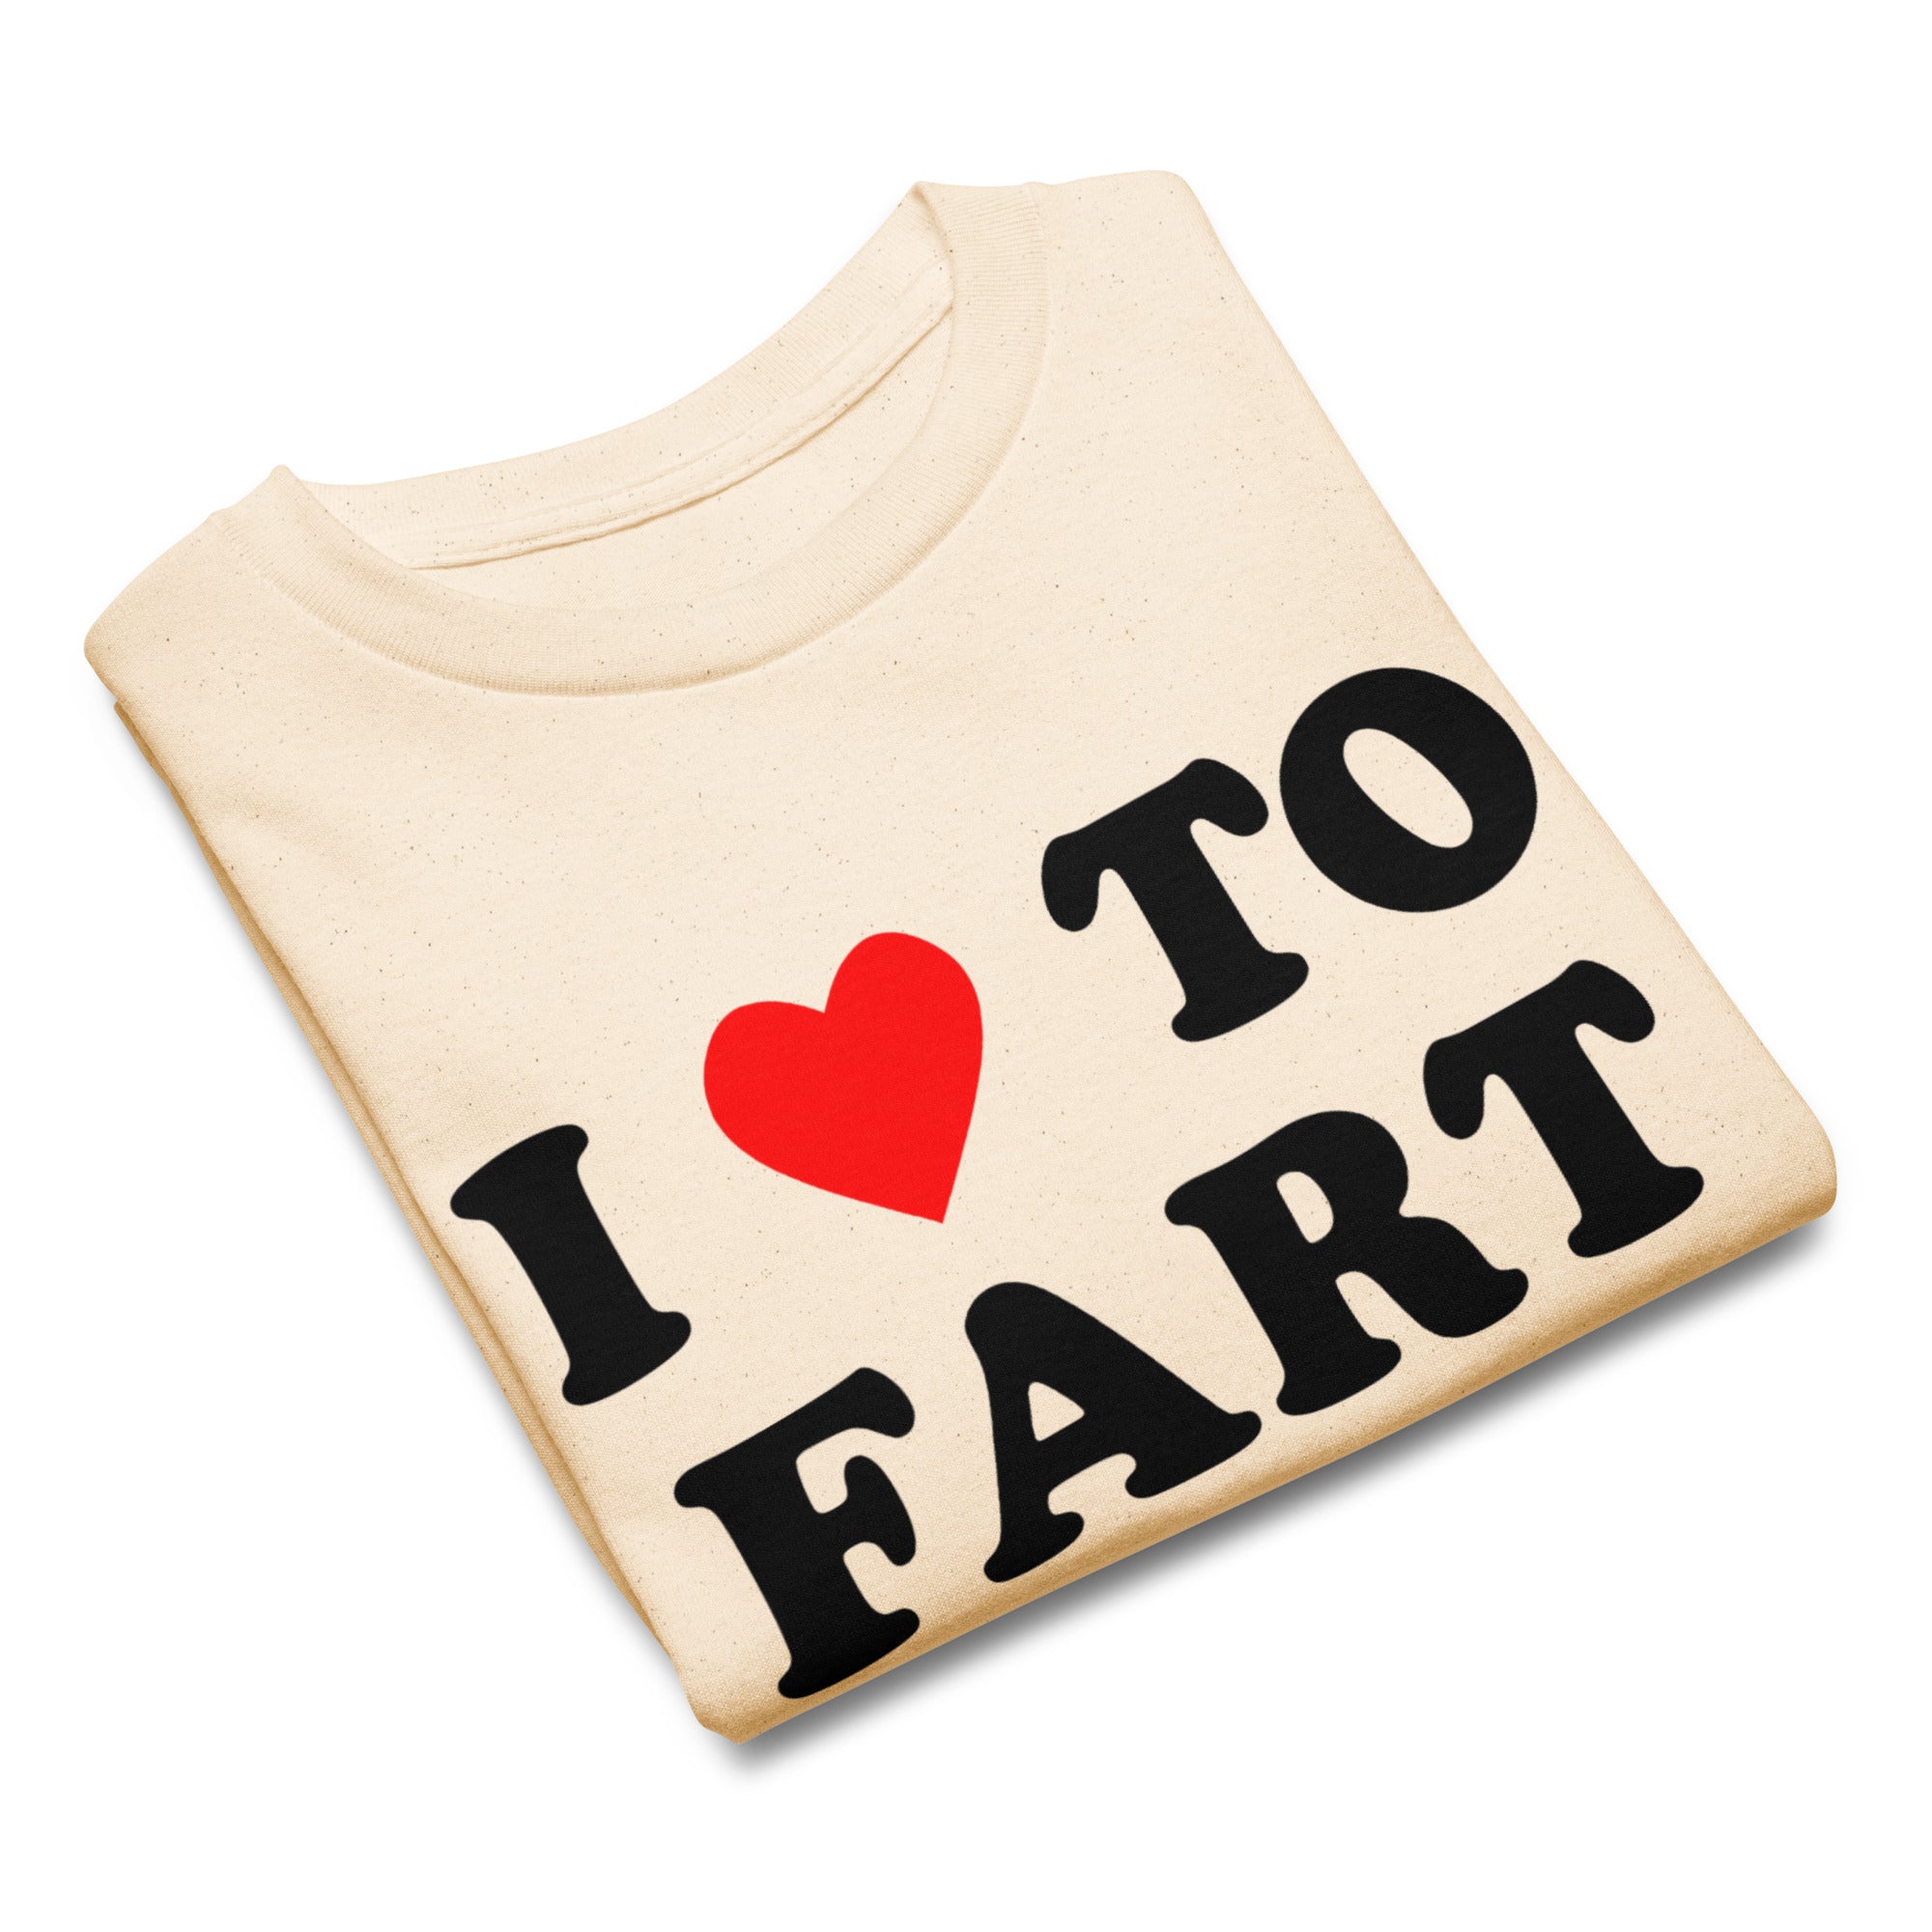 I Love To Fart Youth Classic Tee